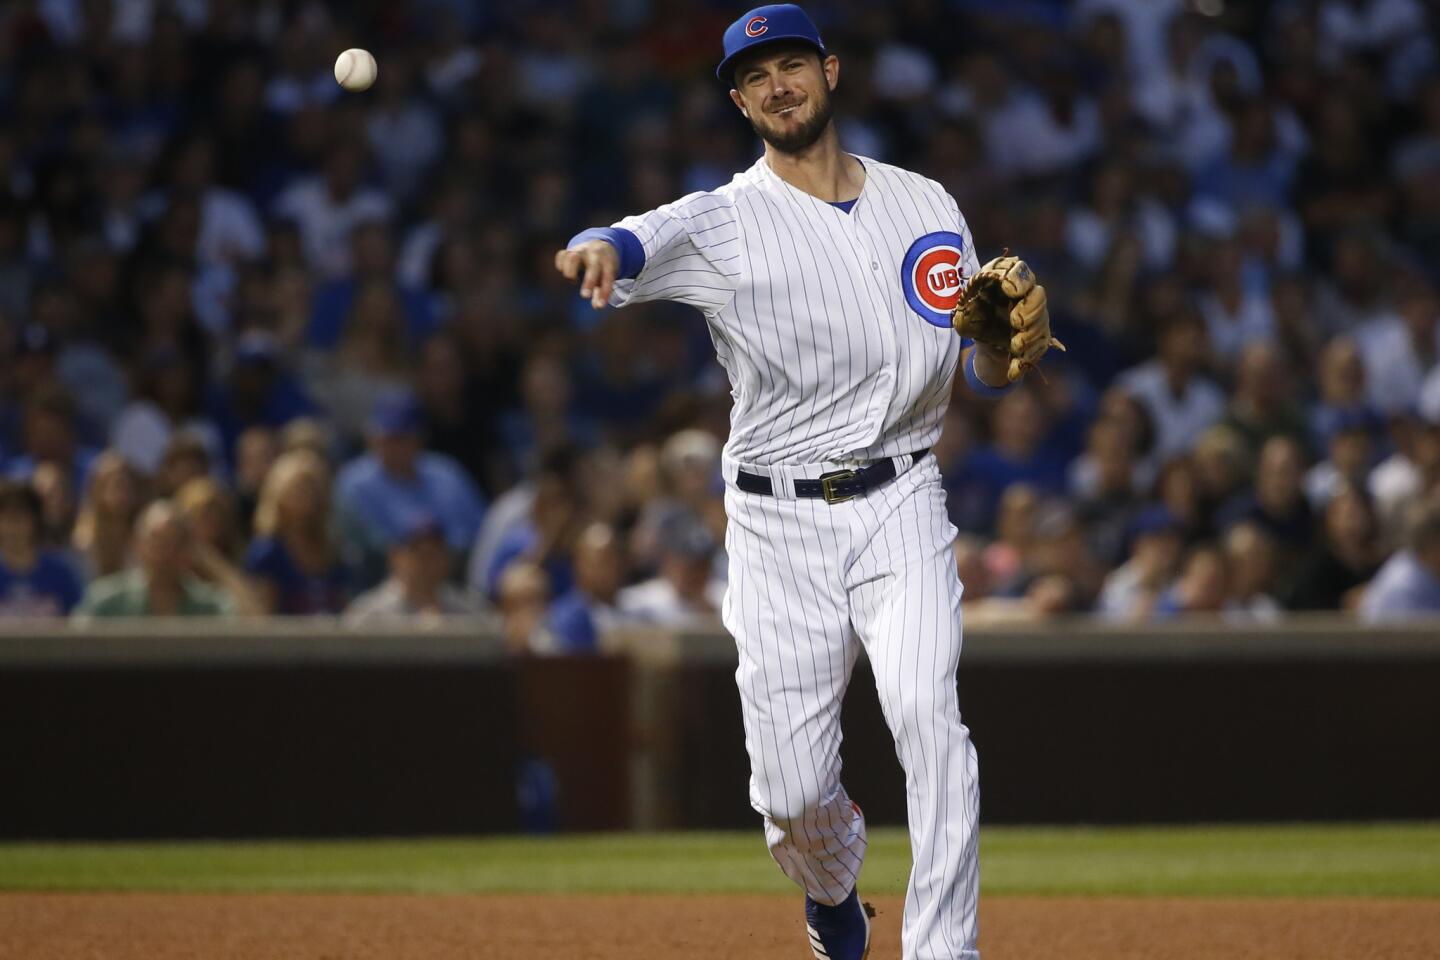 Kris Bryant might wind up as Cubs' lone All-Star representative